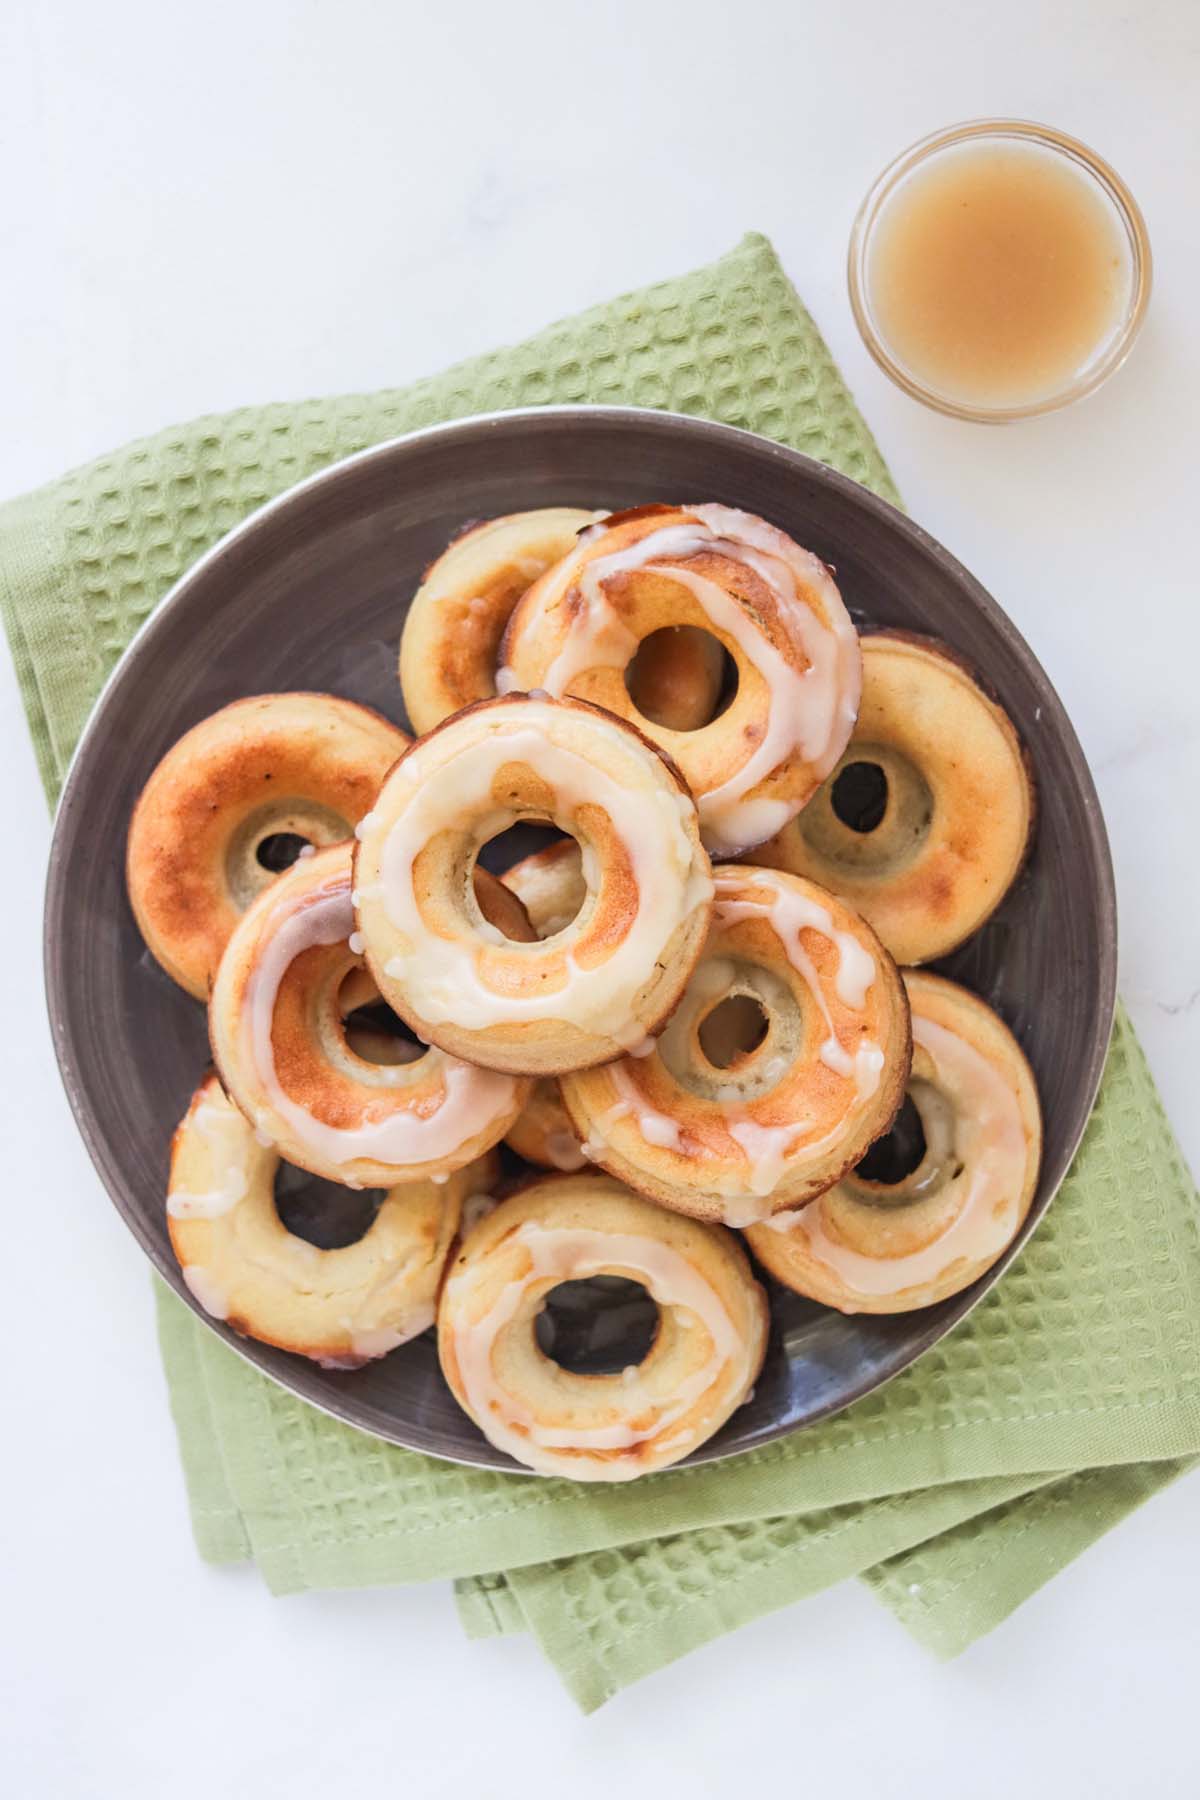 Donuts stacked on a black plate and set on a green kitchen towel.